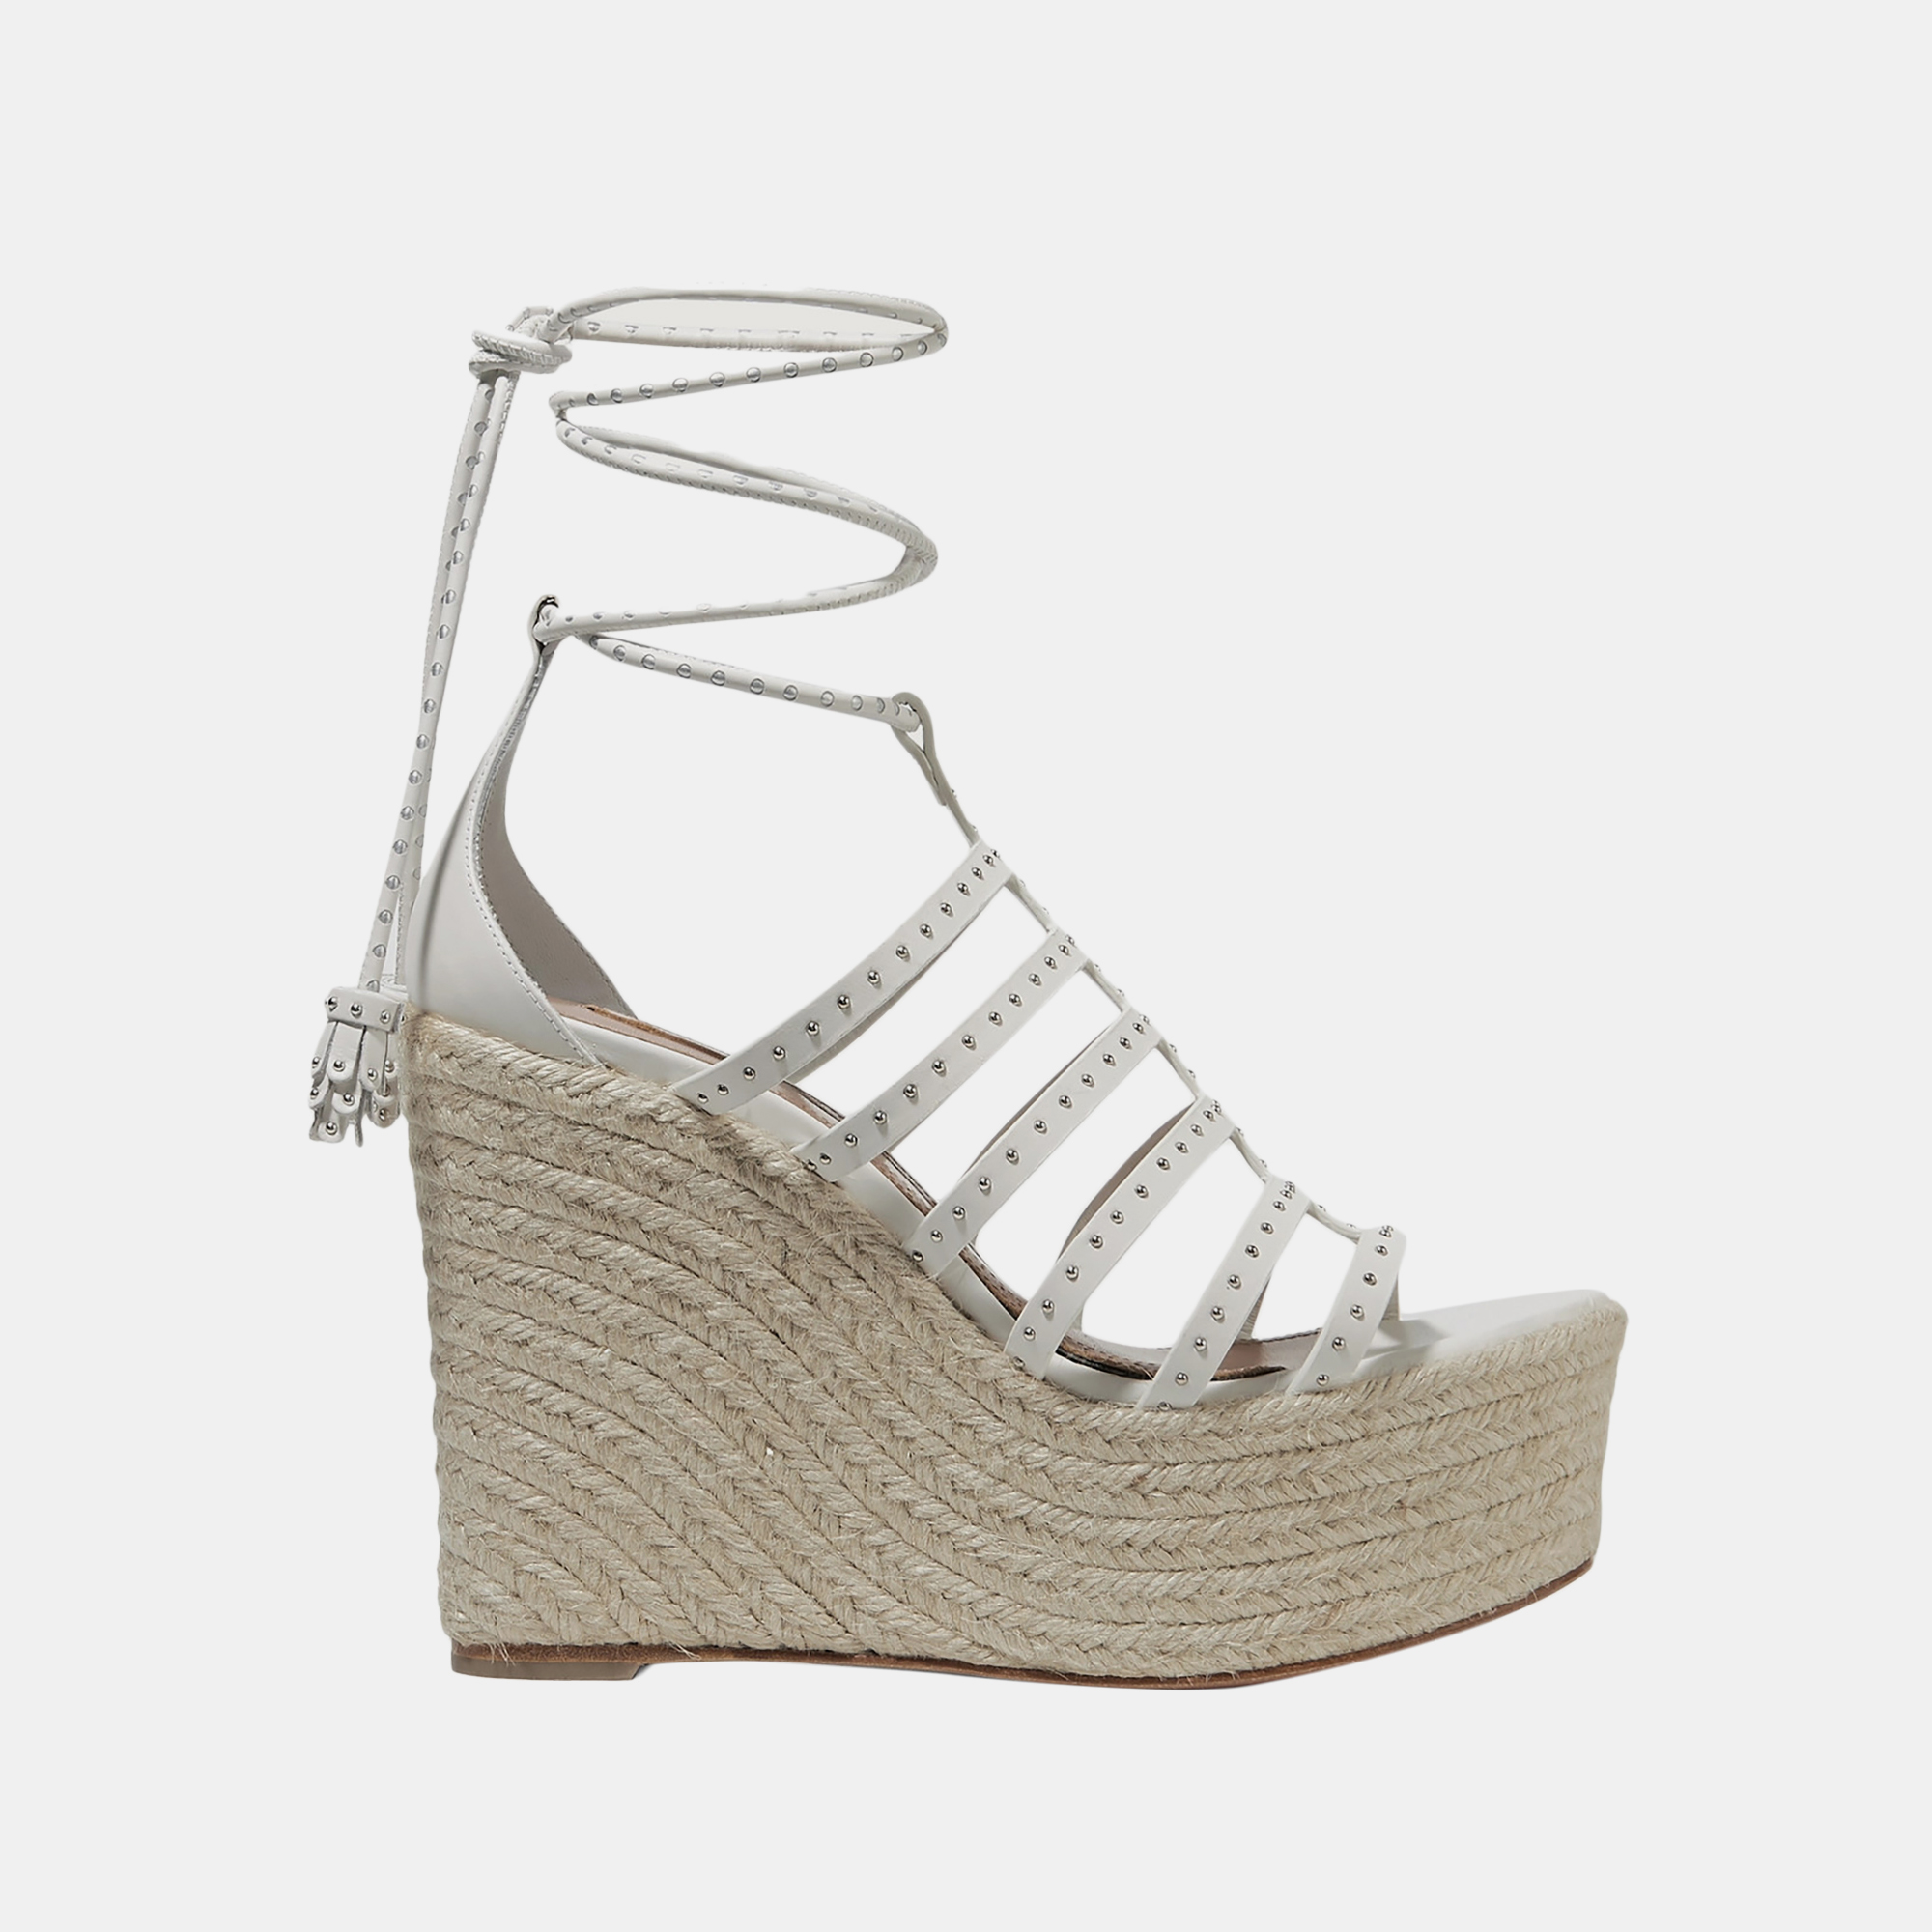 Alaia white leather wedge sandals 40